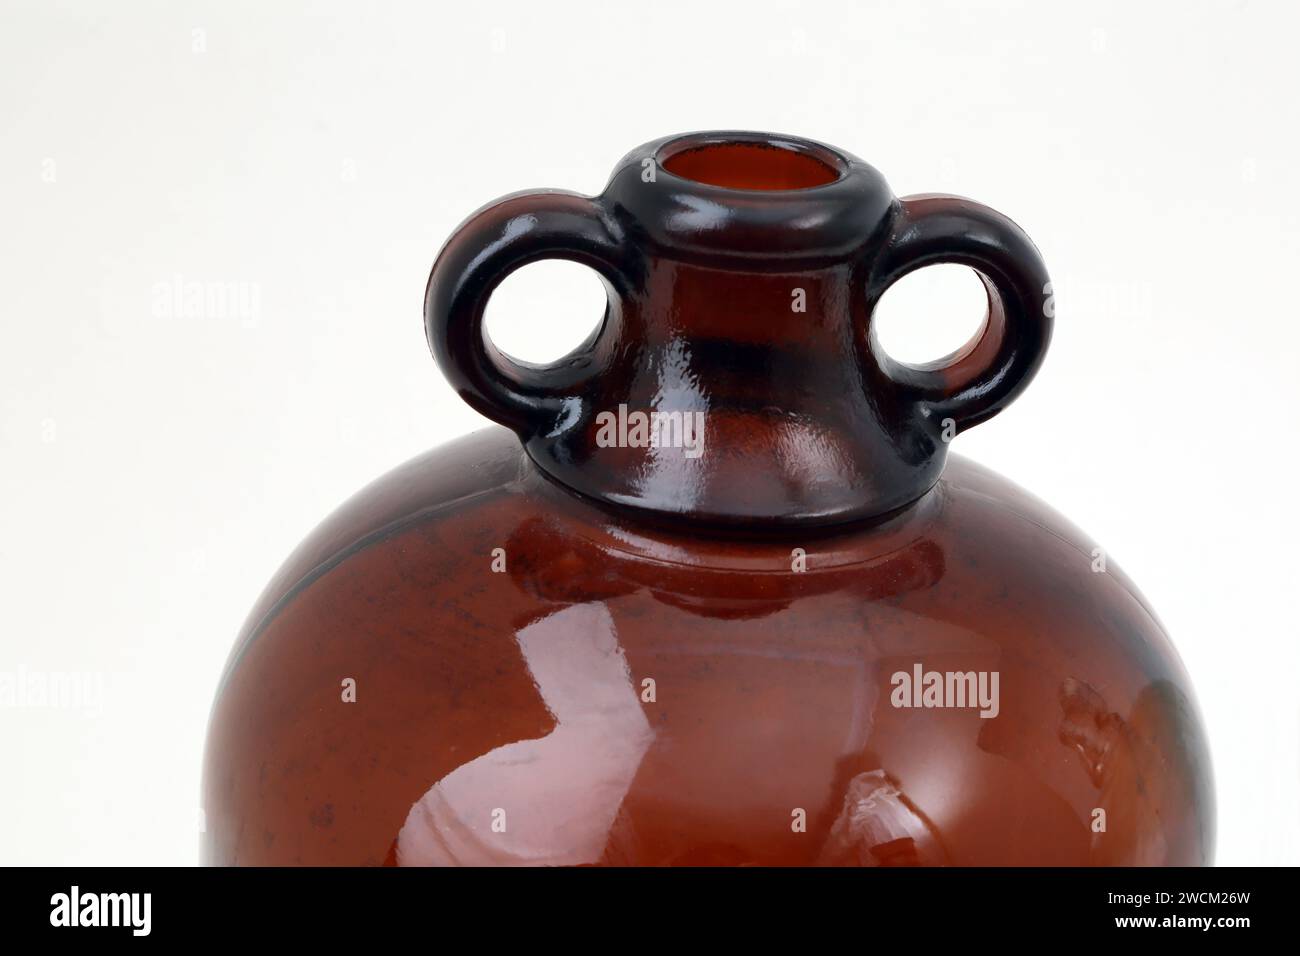 Top of A Large Brown Glass Demijohn used for Fermentation of Beverages Stock Photo